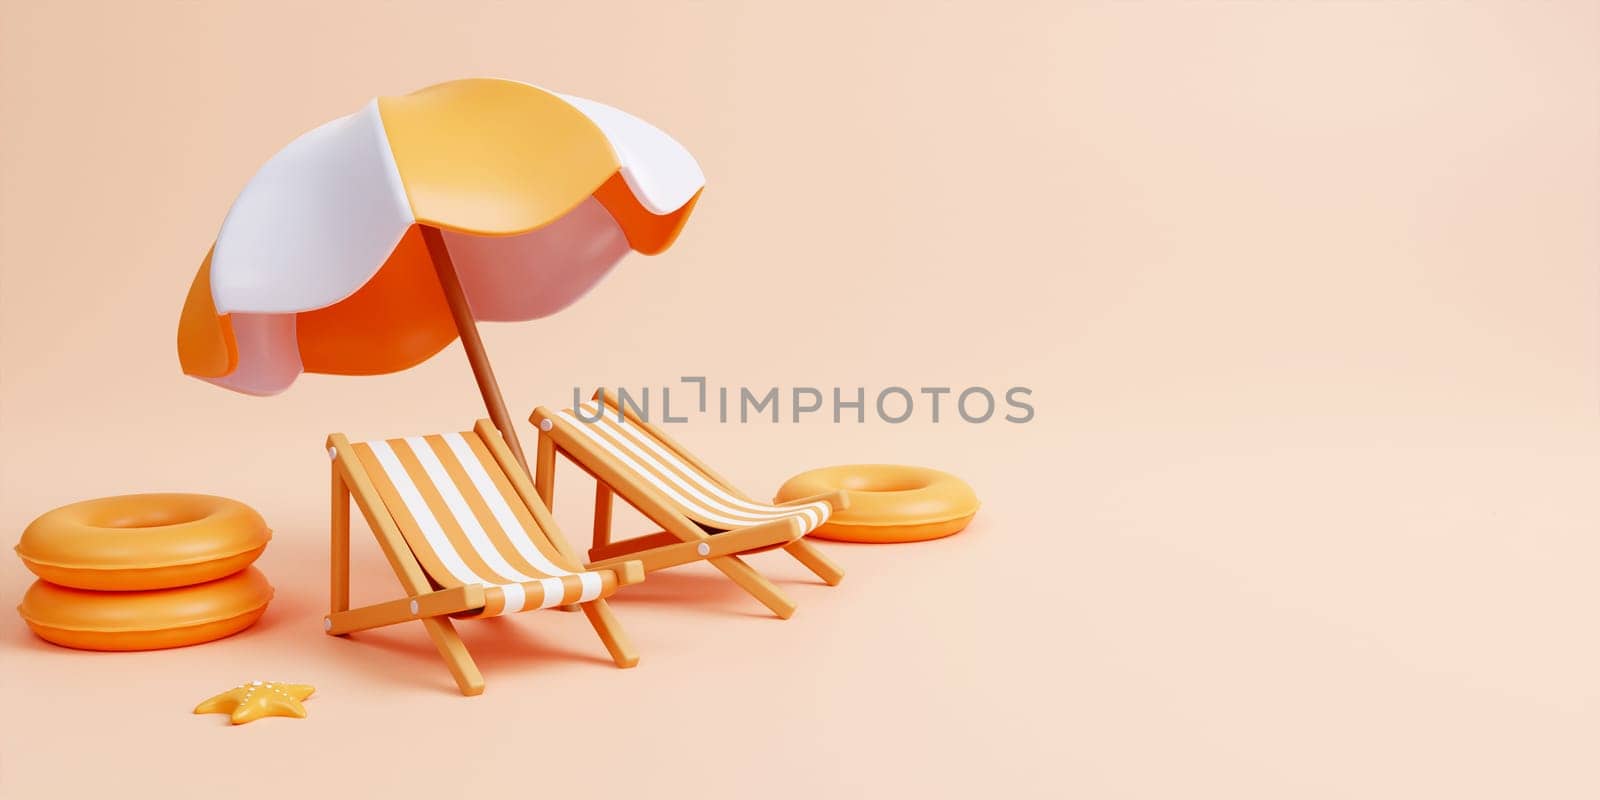 Beach Chair, Umbrella and swimming ring , Summer holiday, Time to travel concept. Creative travel concept idea with copy space. illustration banner 3d rendering illustration by meepiangraphic